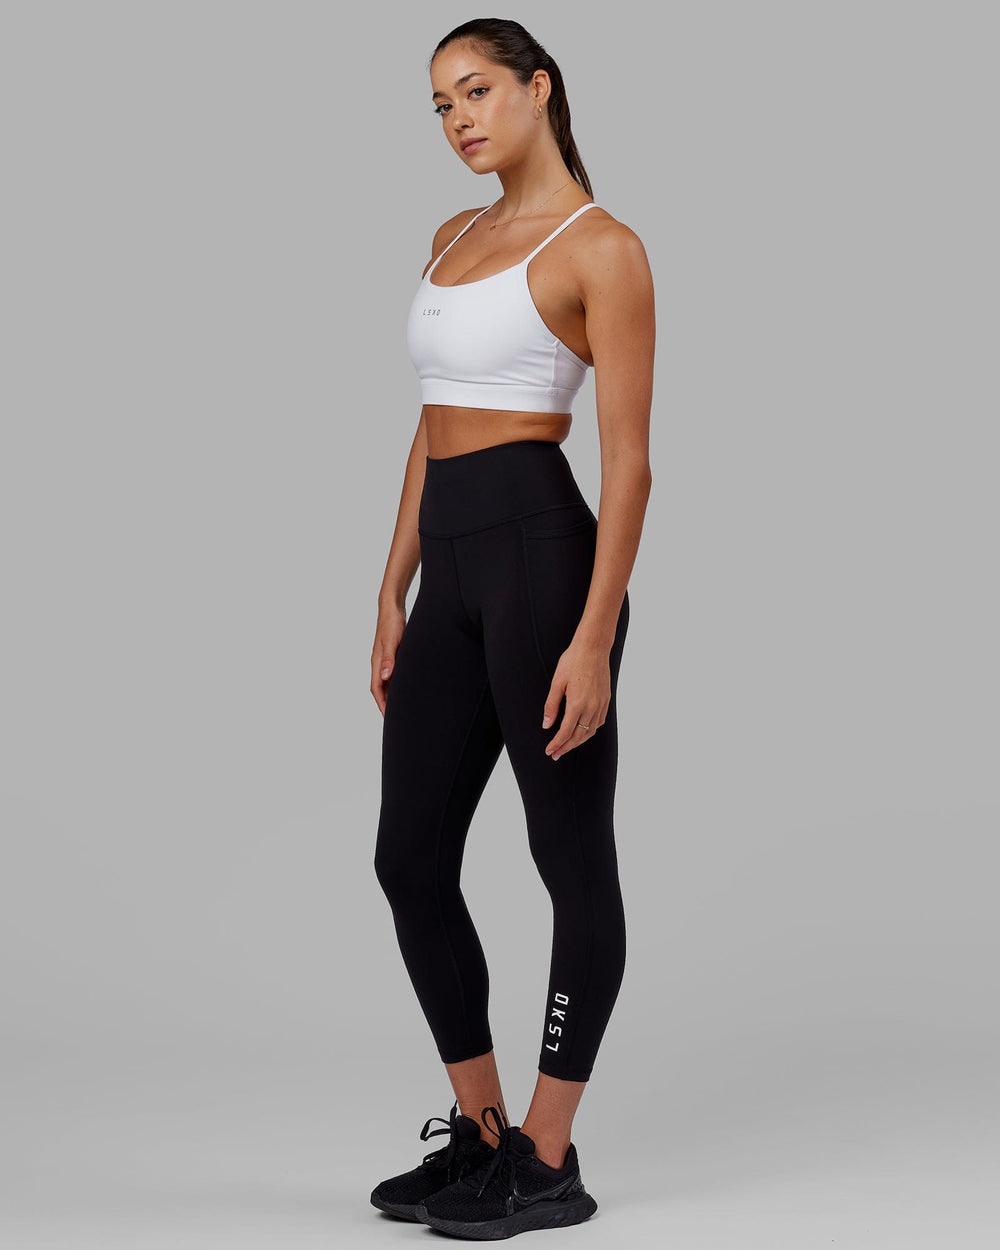 TQD size large black cropped athletic leggings - $18 - From Melinda